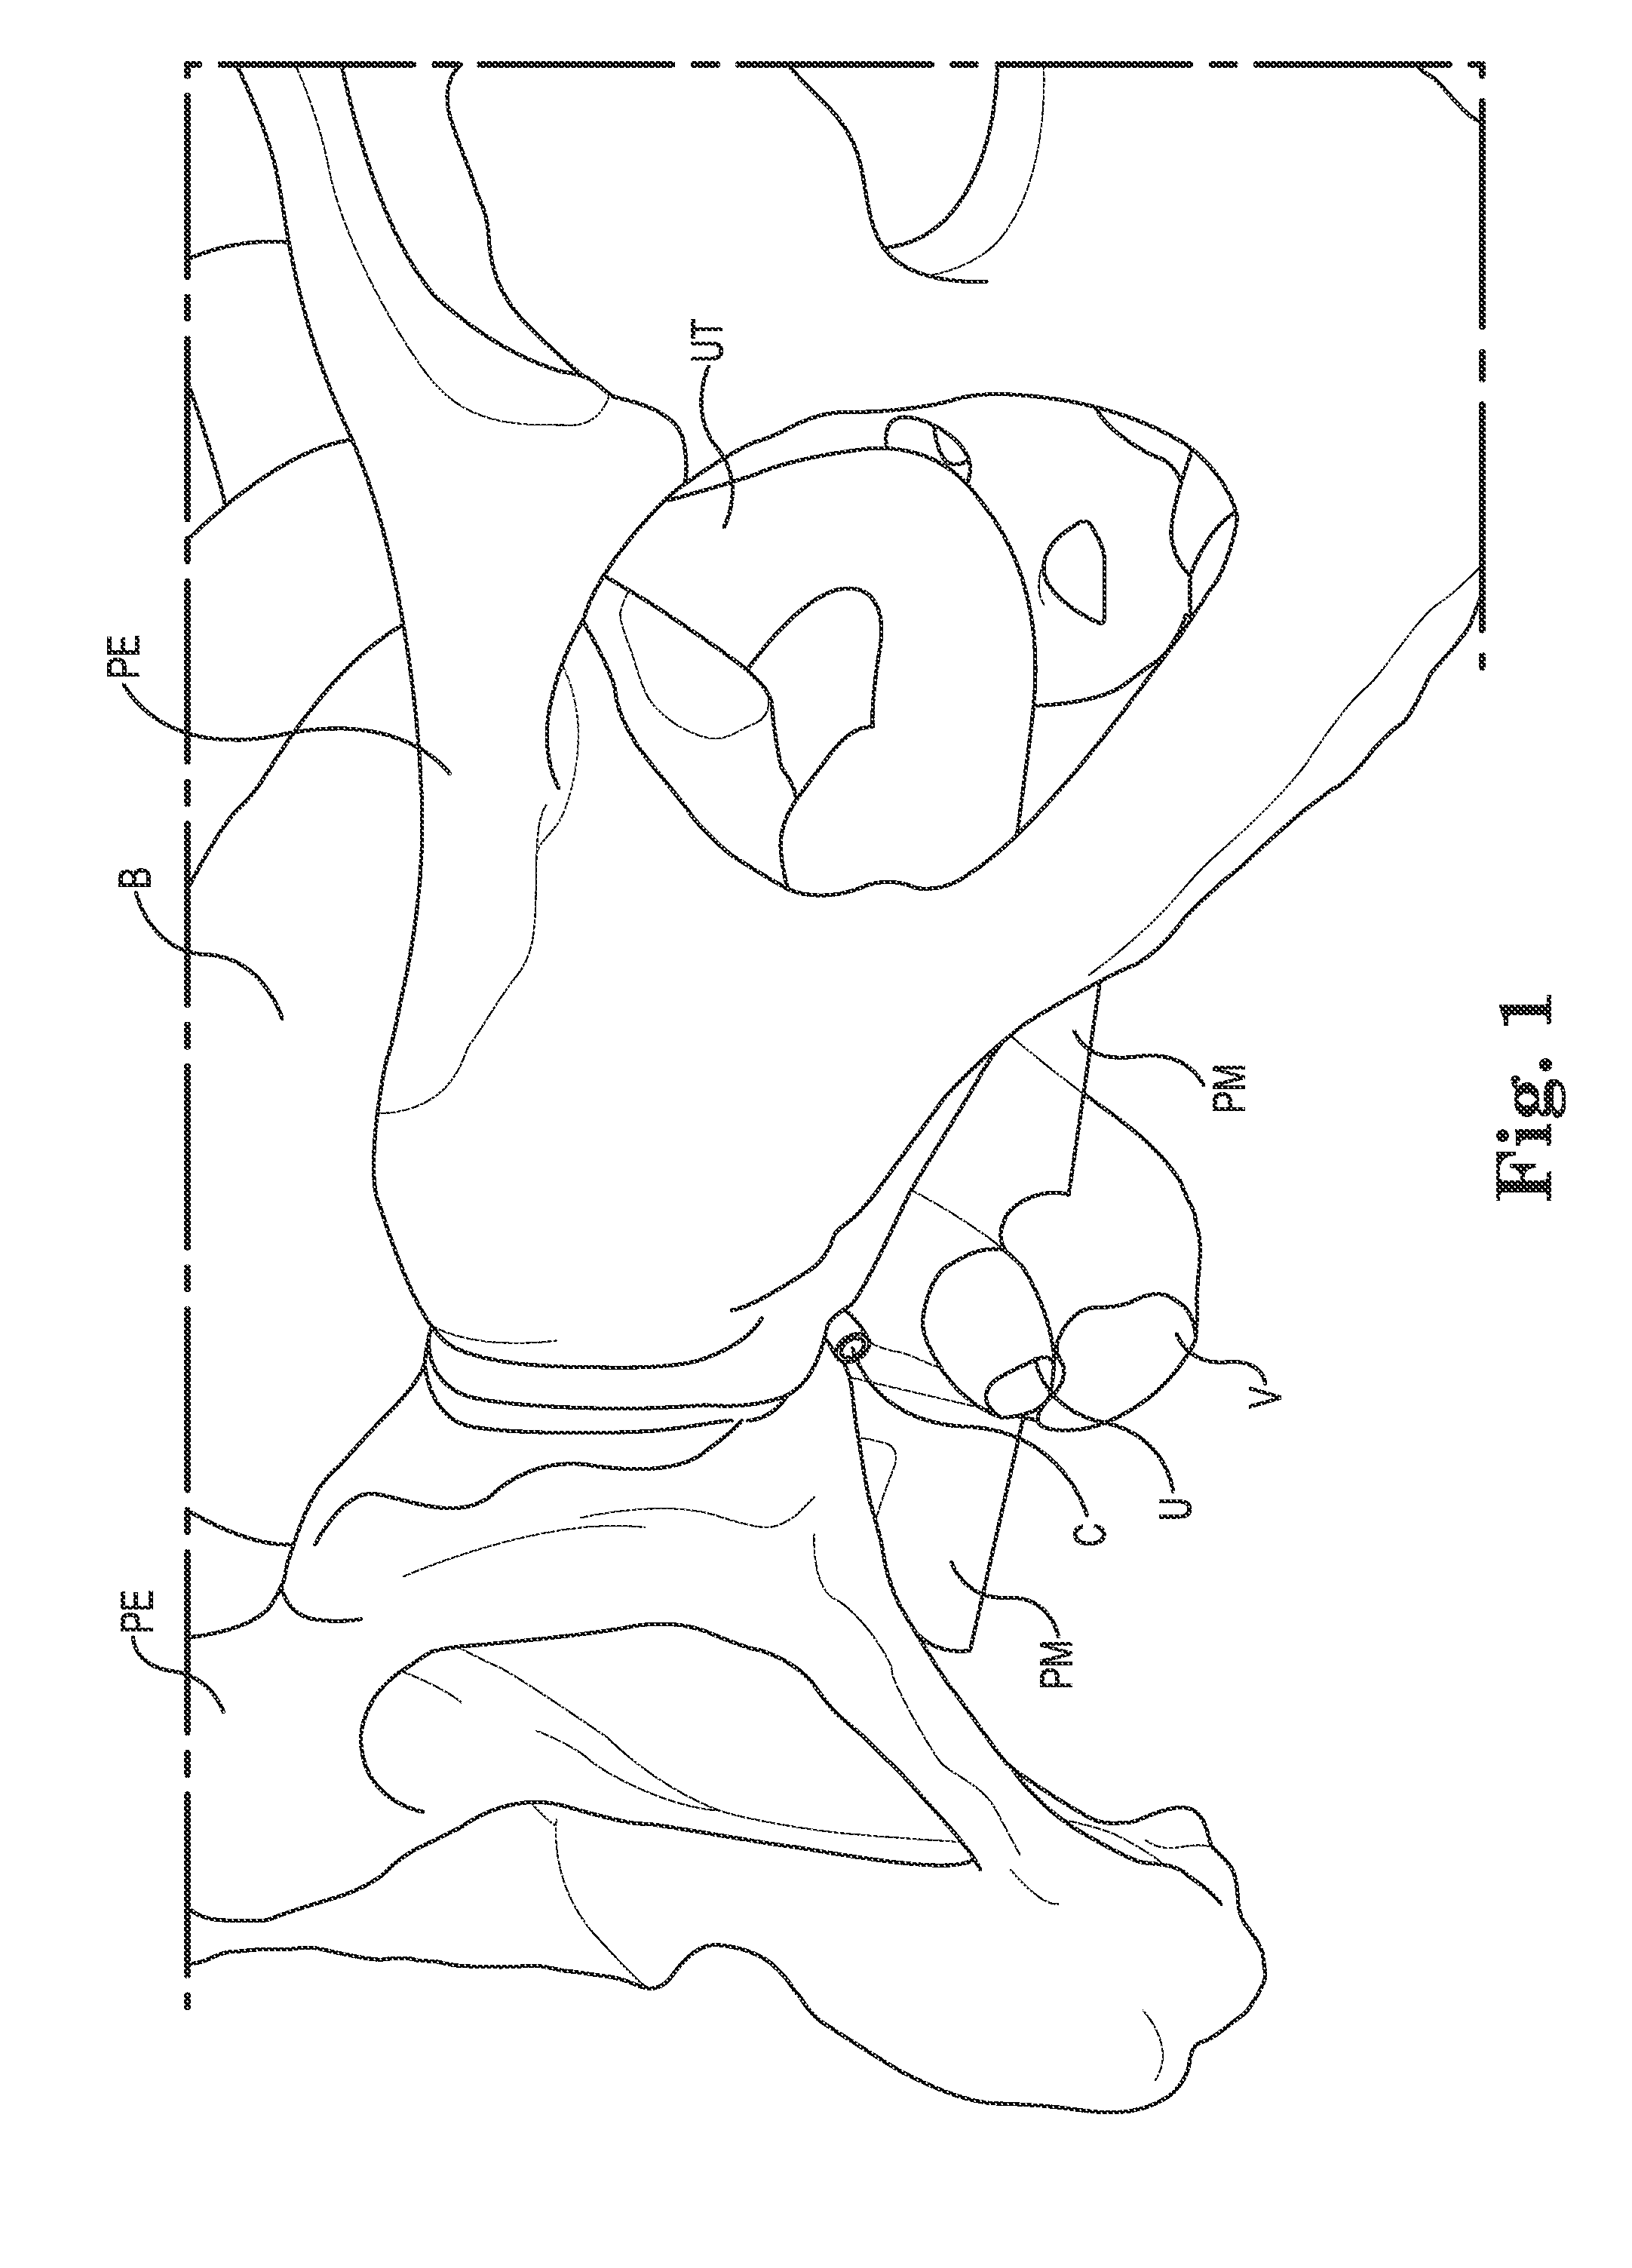 Surgical implant system and method